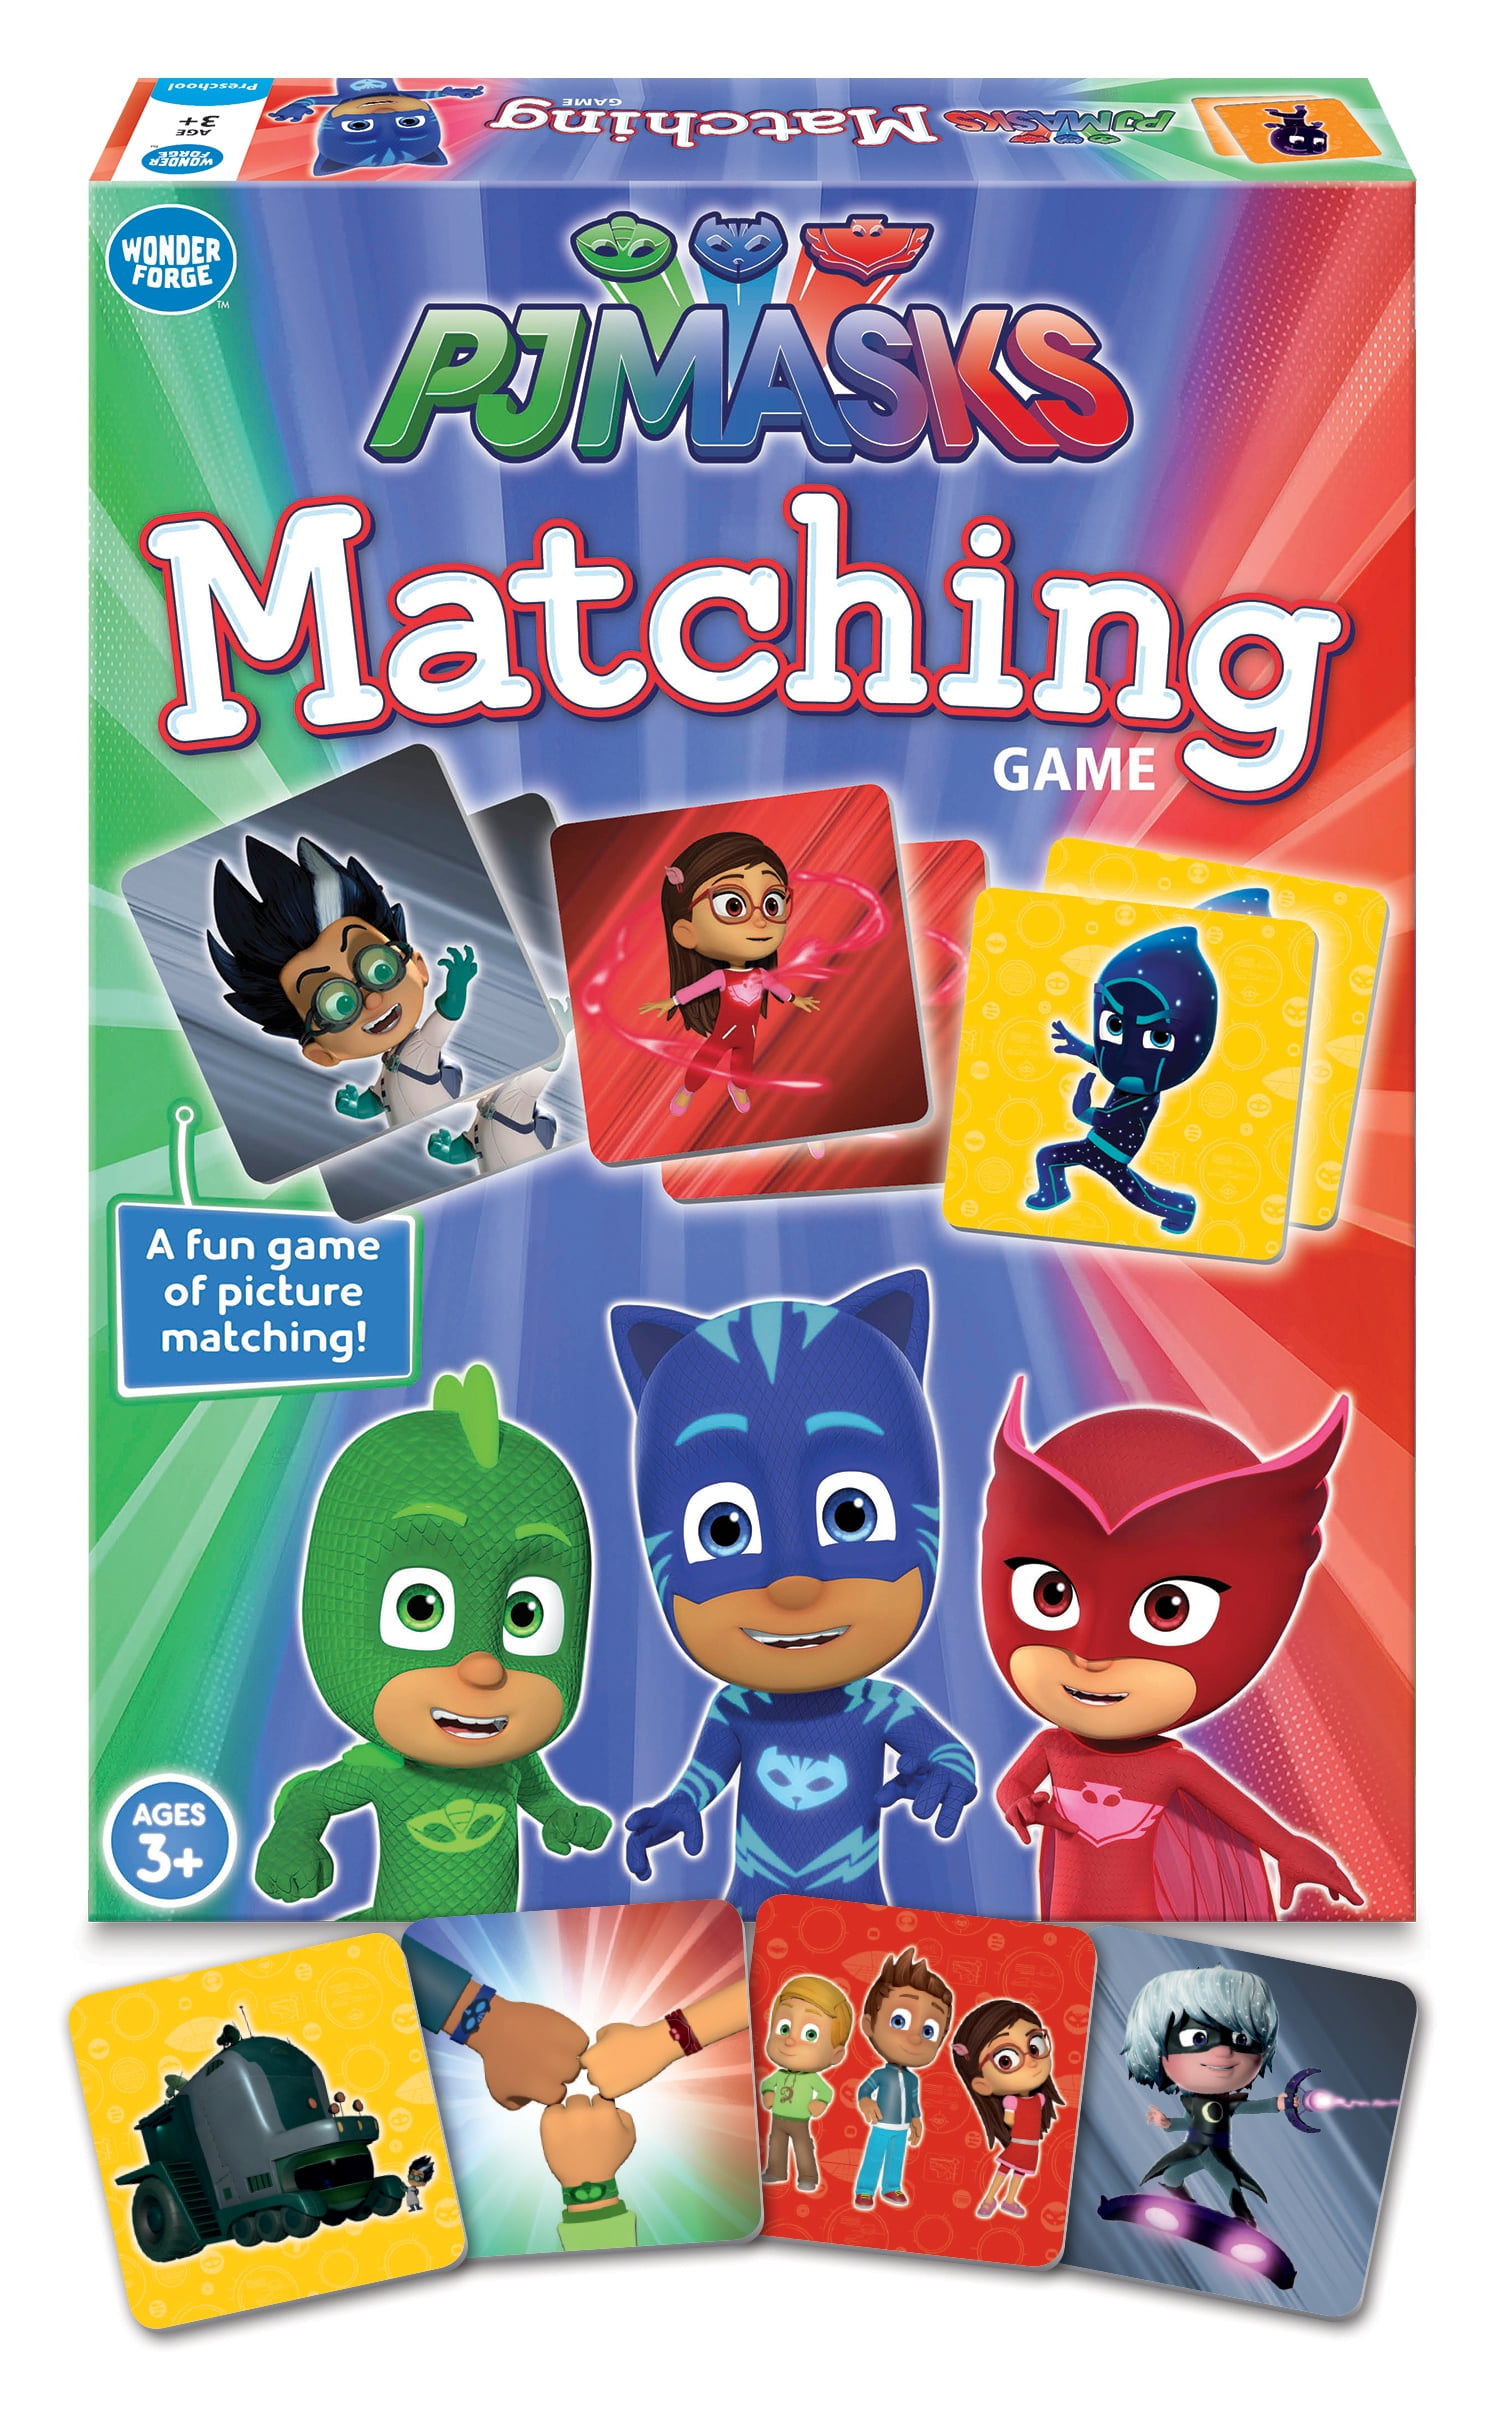 A Fun & Fast Memory Game You Can Play Over & Over Wonder Forge PJ Masks Matching Game for Boys & Girls Age 3 and Up 